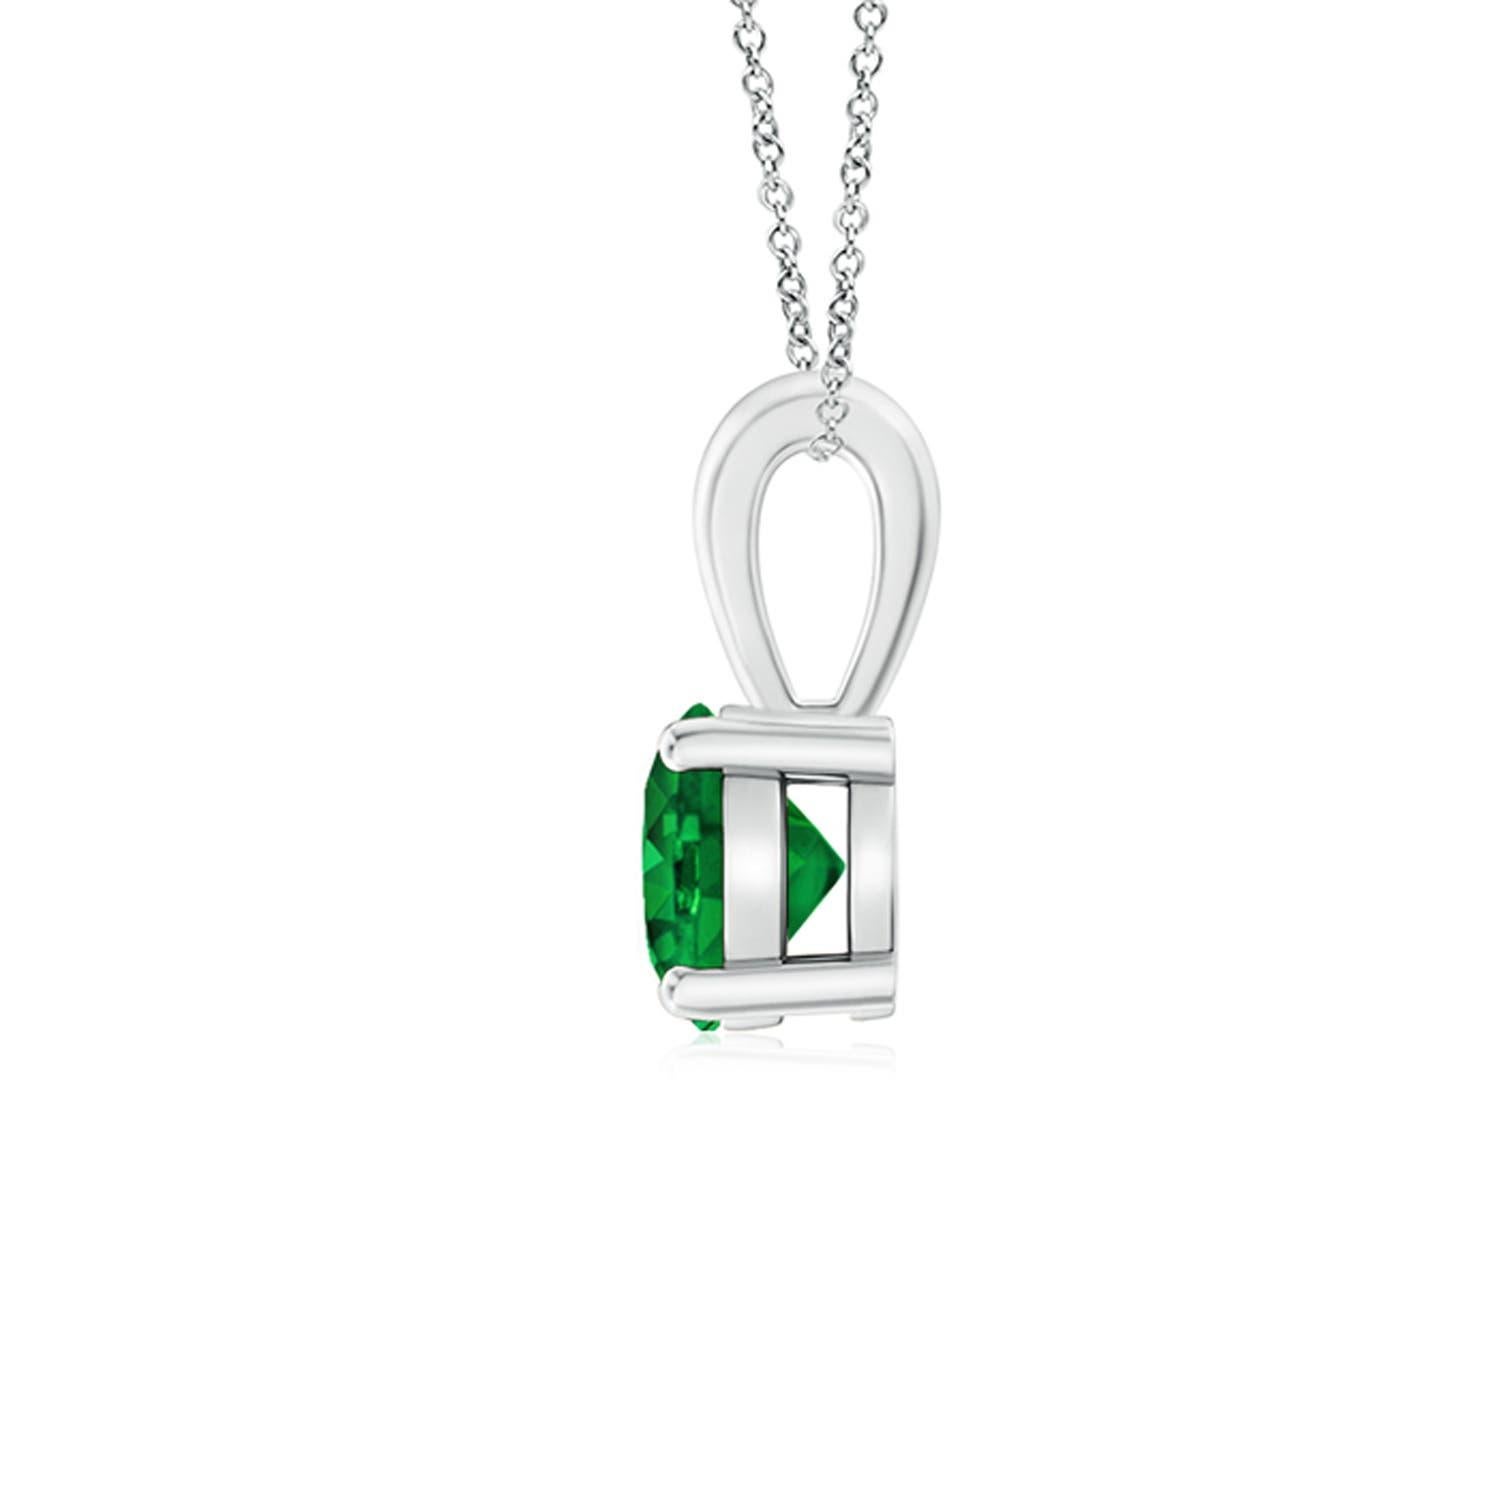 Linked to a lustrous bale is a lush green emerald solitaire secured in a four prong setting. Crafted in Platinum, the elegant design of this classic emerald pendant draws all attention towards the magnificence of the center stone.
Emerald is the